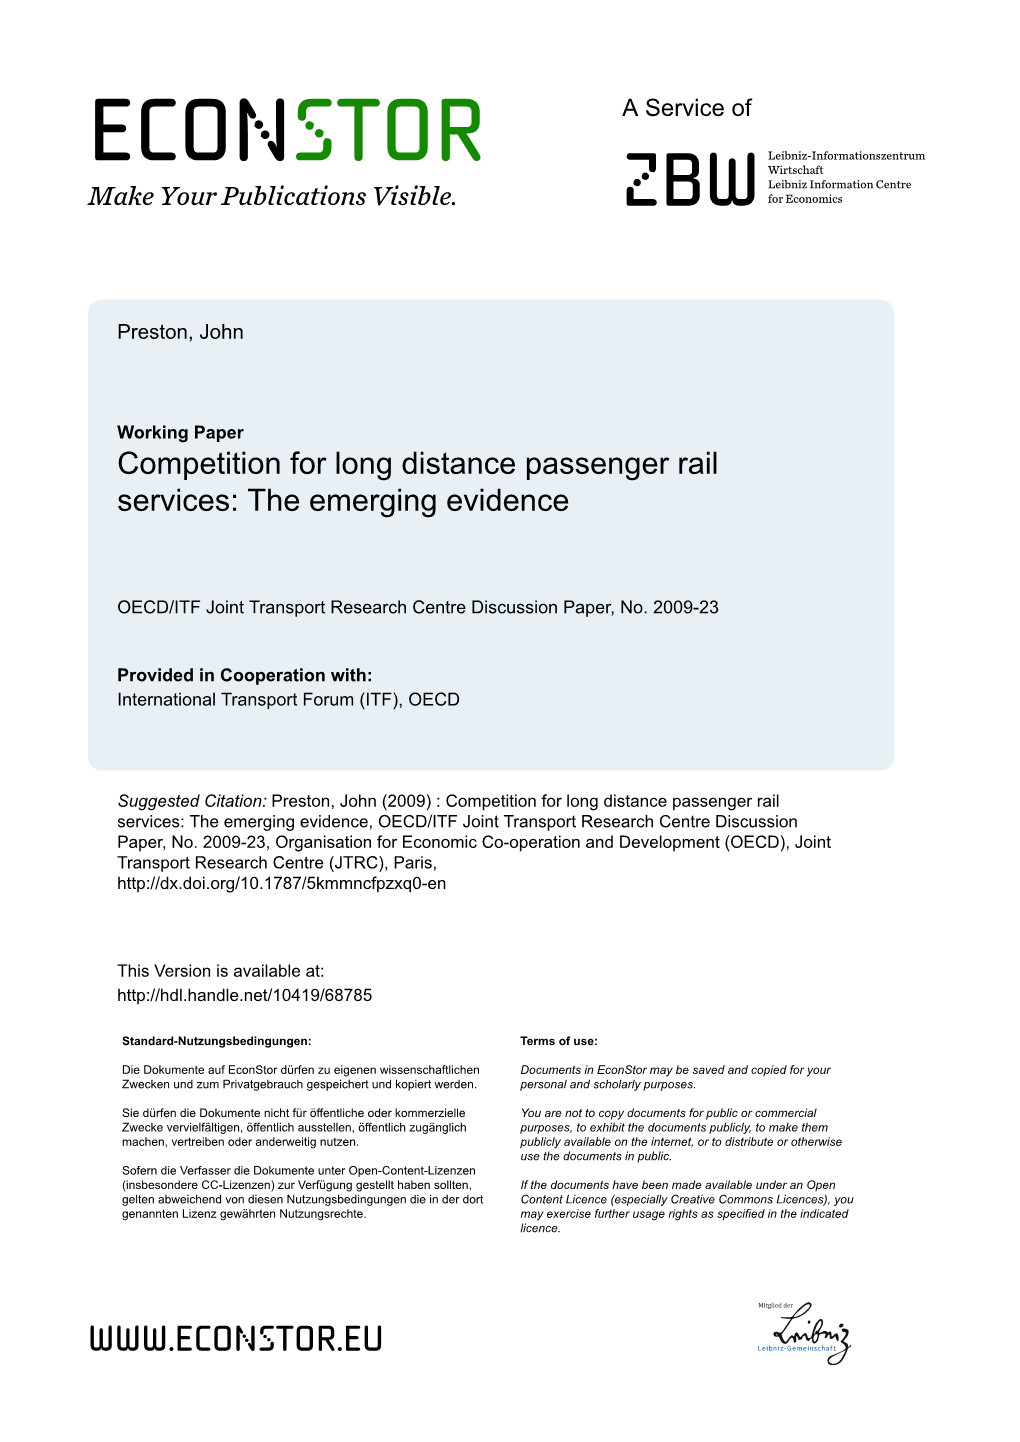 Competition for Long Distance Passenger Rail Services: the Emerging Evidence